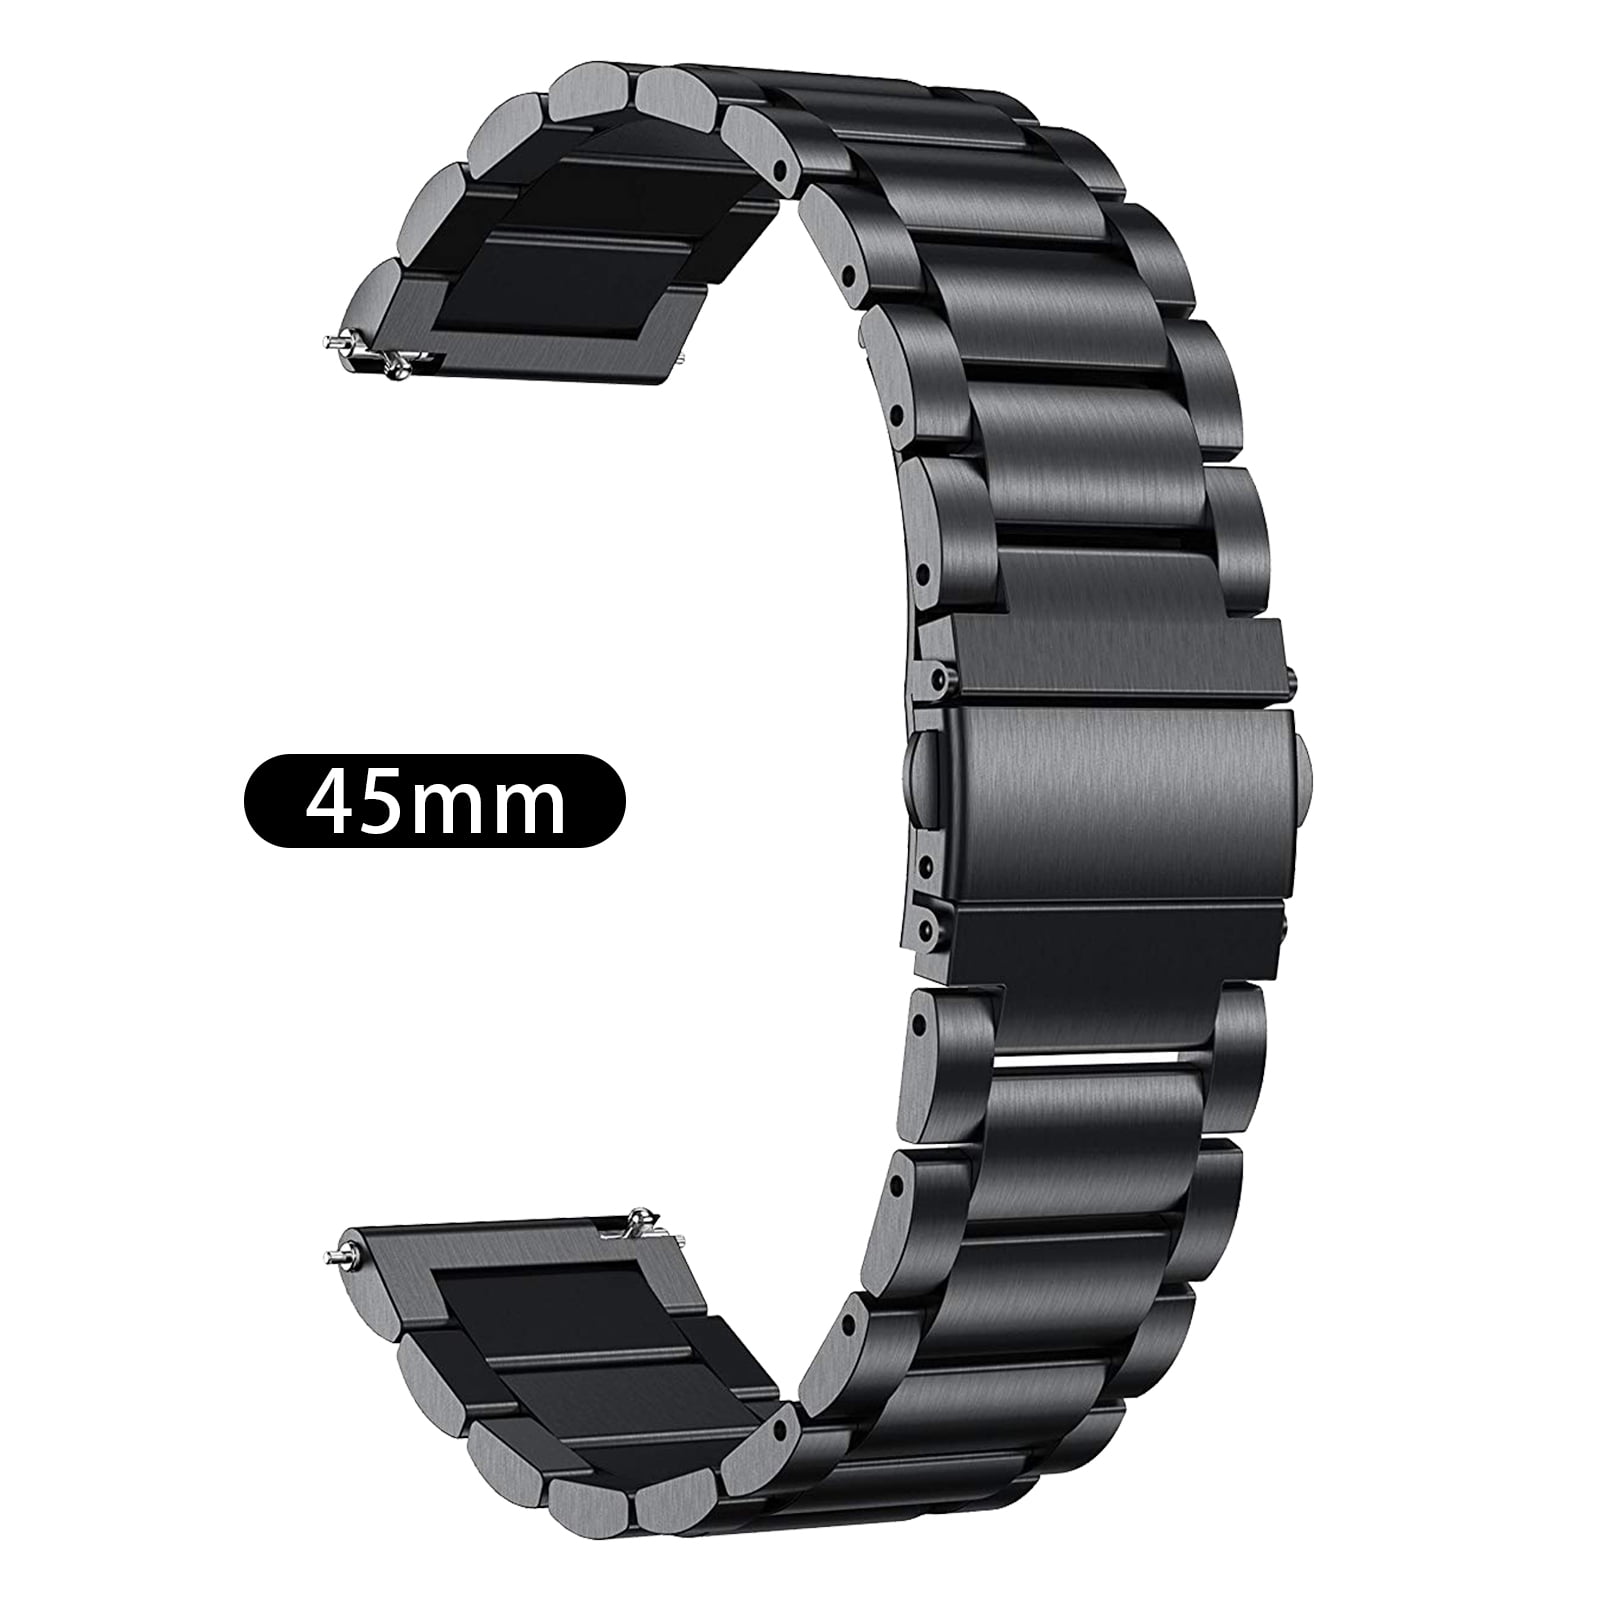 Bands Fit for Galaxy Watch 3 41mm 45mm, EEEkit Watch Band Solid Samsung Galaxy Watch 3 Stainless Steel Bands